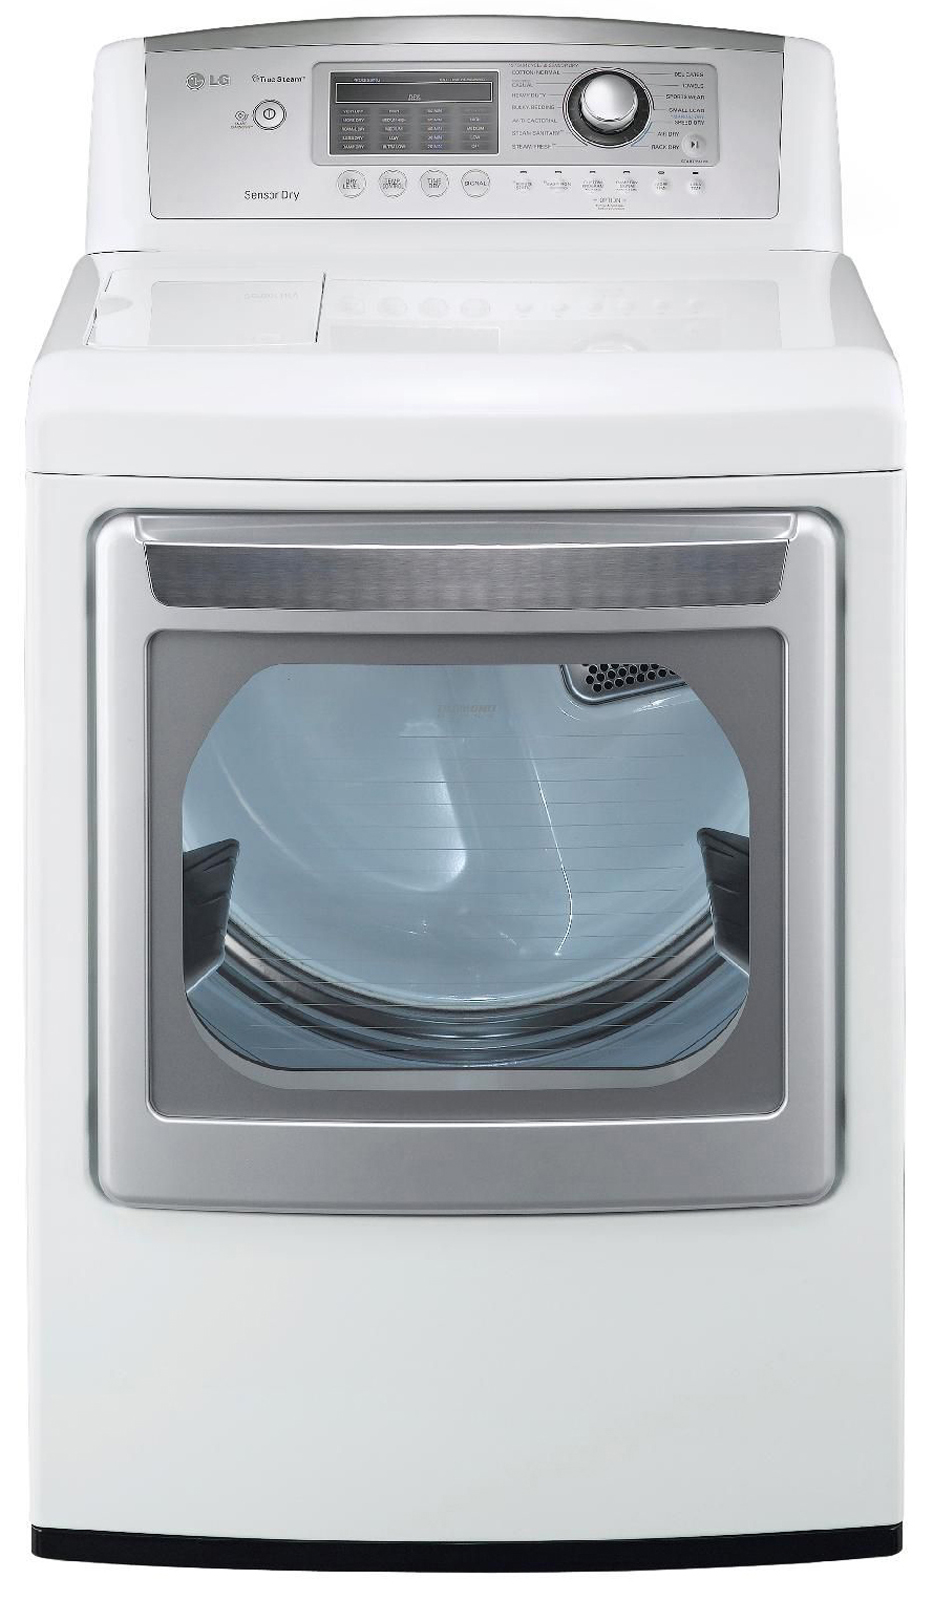 UPC 048231012546 product image for LG 7.3 cu. ft. Ultra Large Capacity Electric Steam Dryer w/ Sensor Dry - White | upcitemdb.com